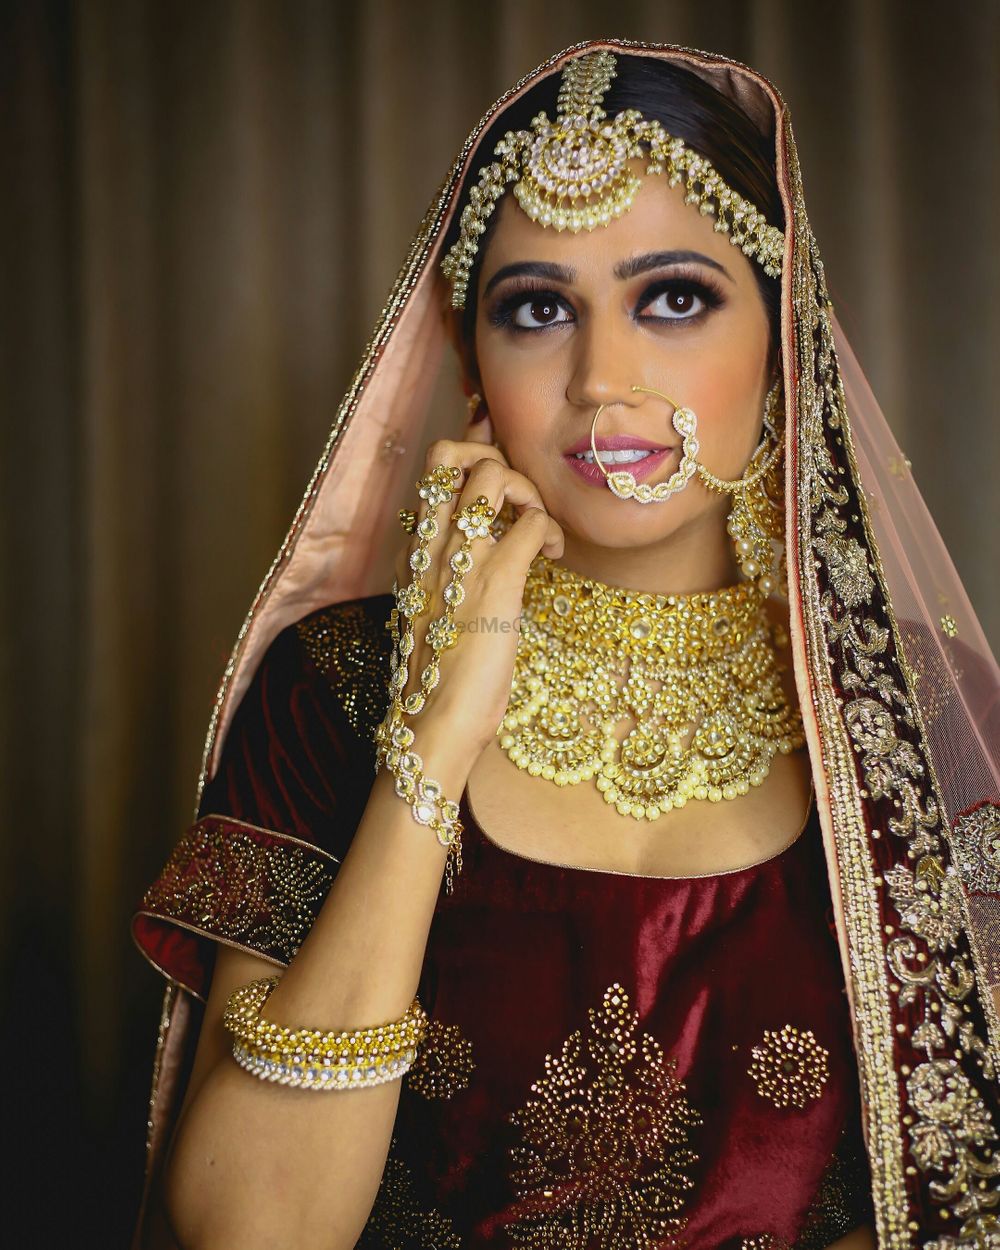 Photo By Kohl - Hair and Makeup by Megha Gomes - Bridal Makeup